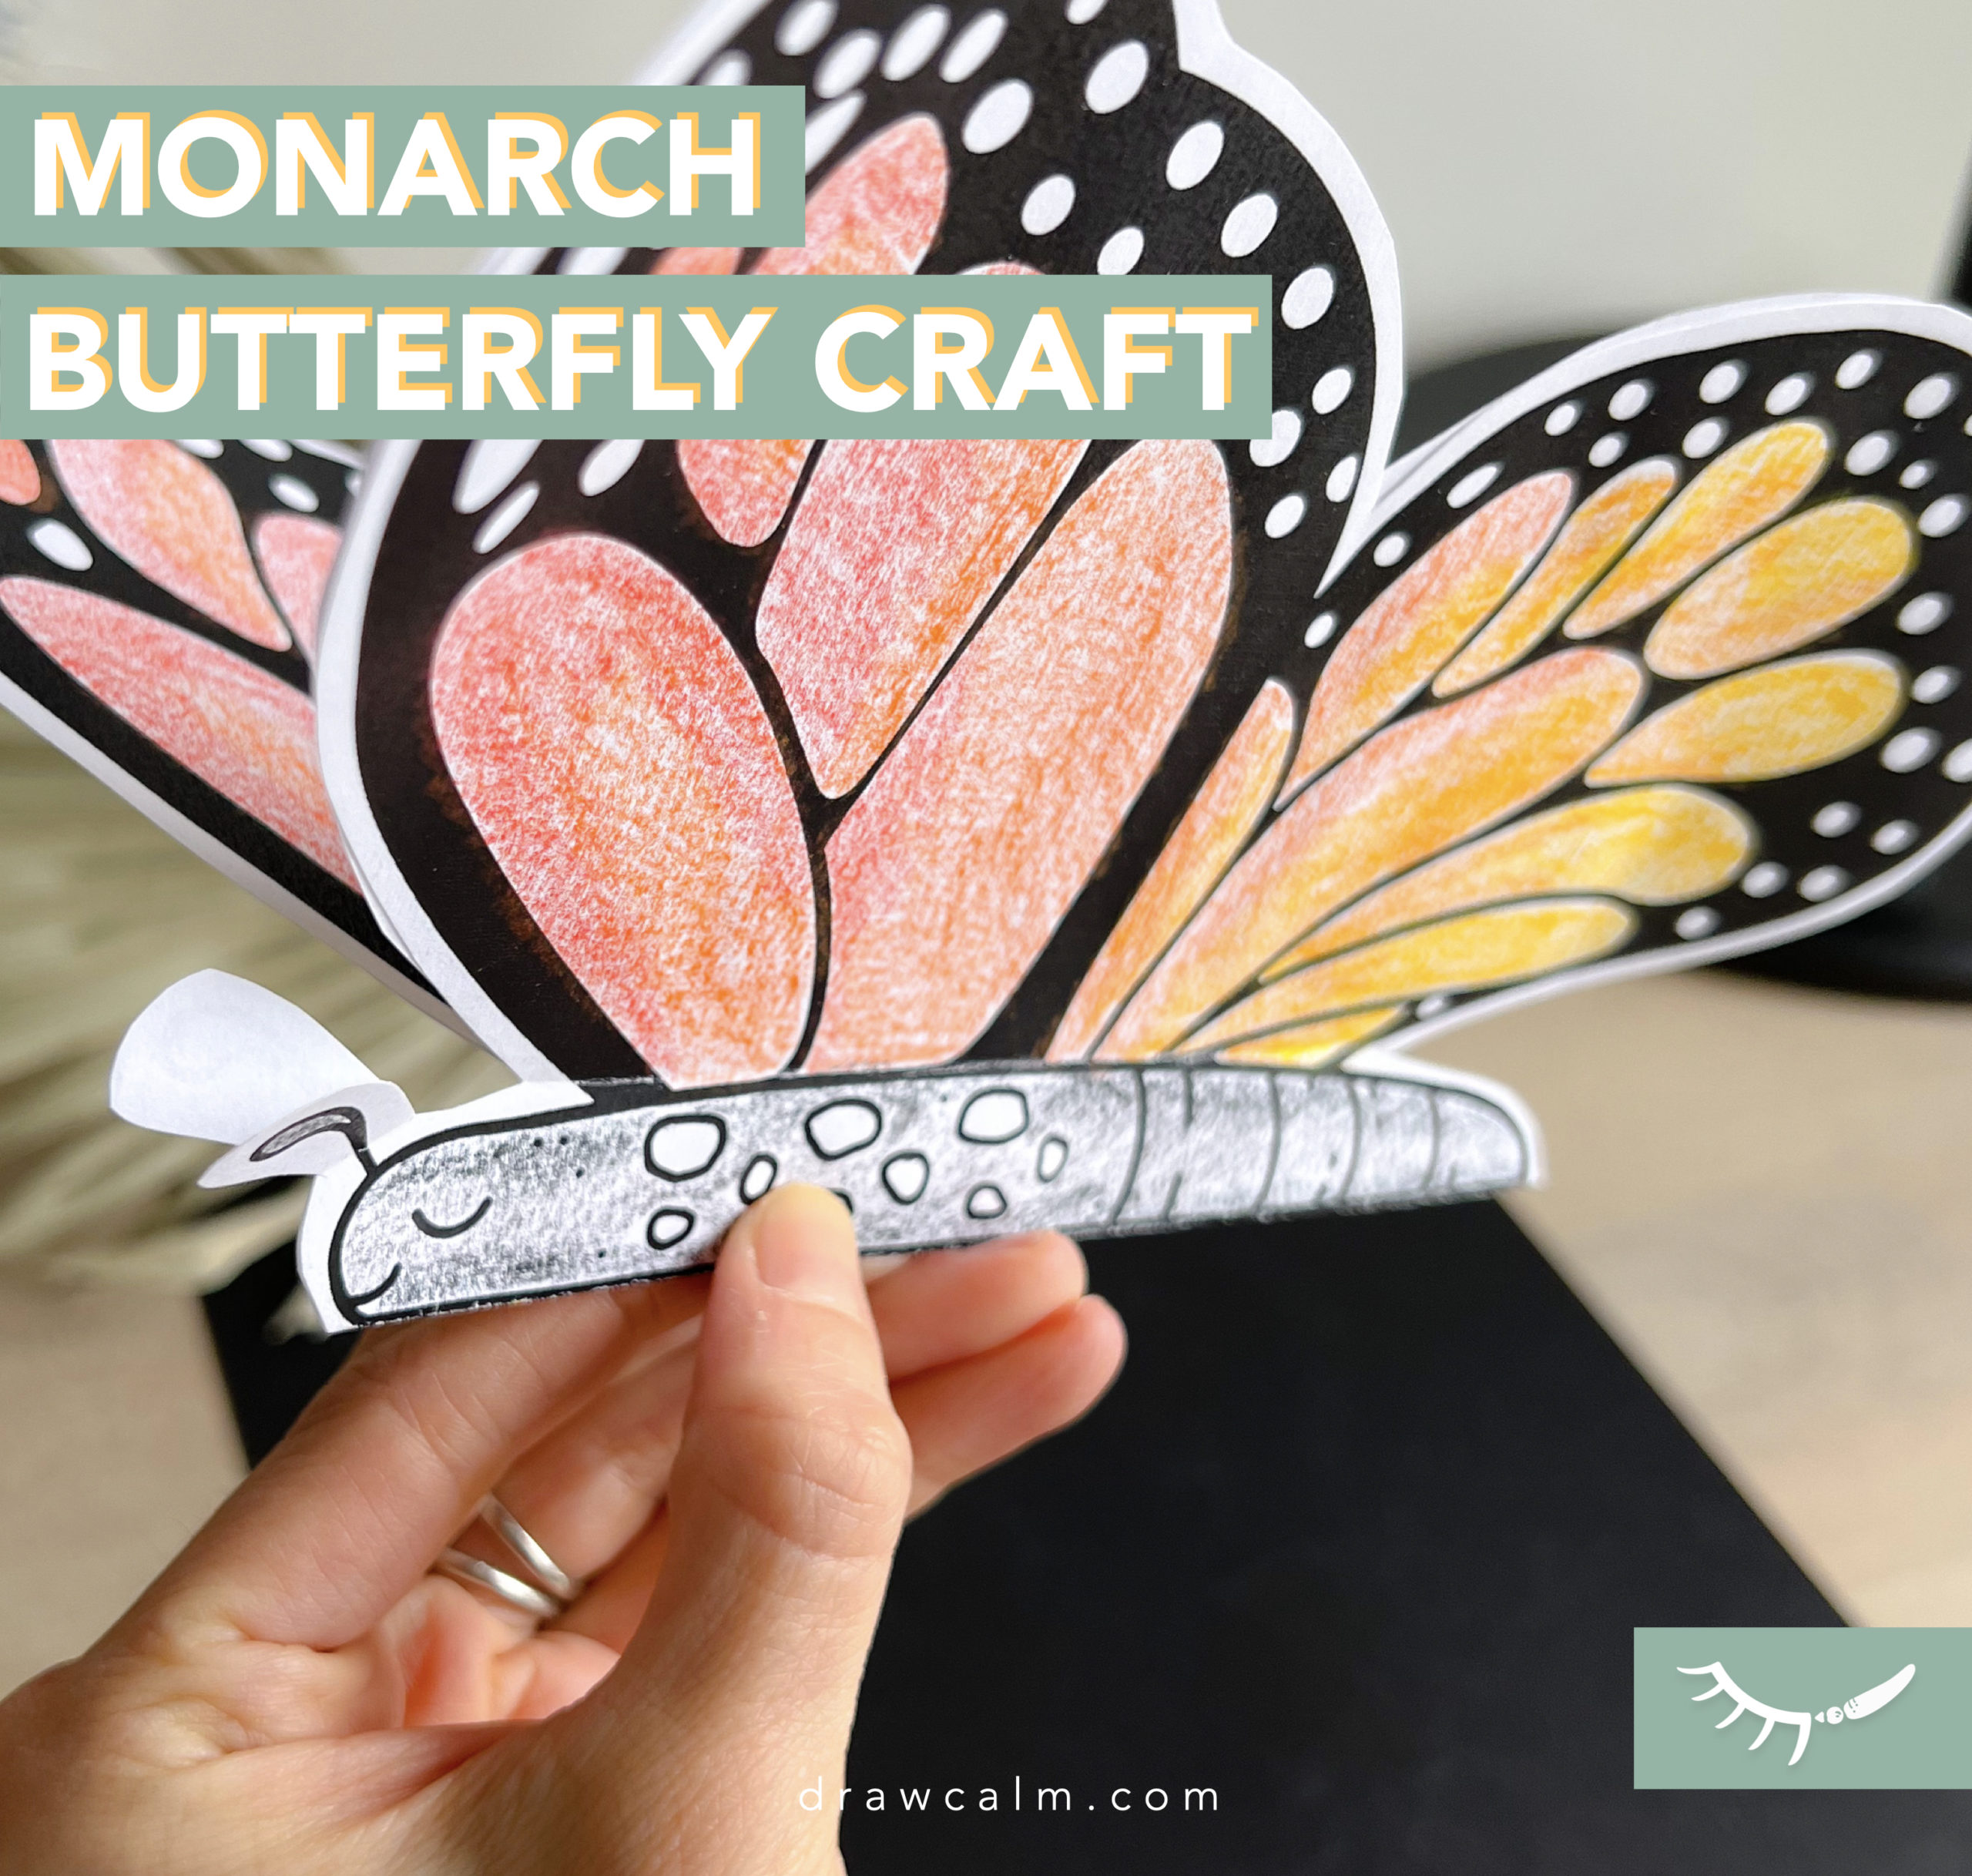 Coloring Page of butterfly life cycle craft. Printable monarch butterfly craft made of 2 pieces of paper, designed by draw calm.